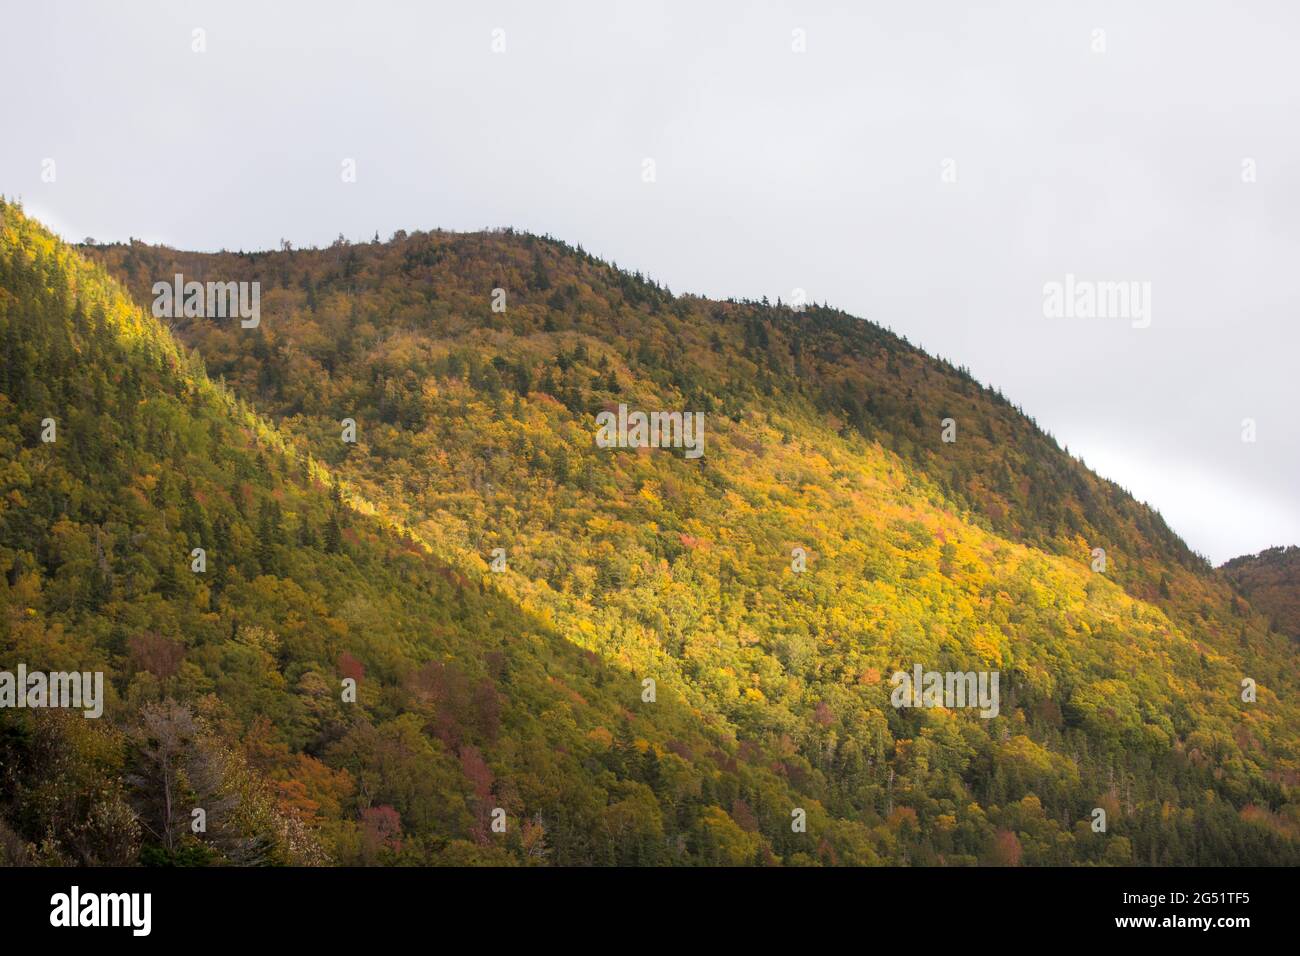 Close up of French Mountain valley in Cape Breton Nova Scotia during Autumn. Fall foliage of the mountains with mixed deciduous trees, Cabot Trail. Stock Photo